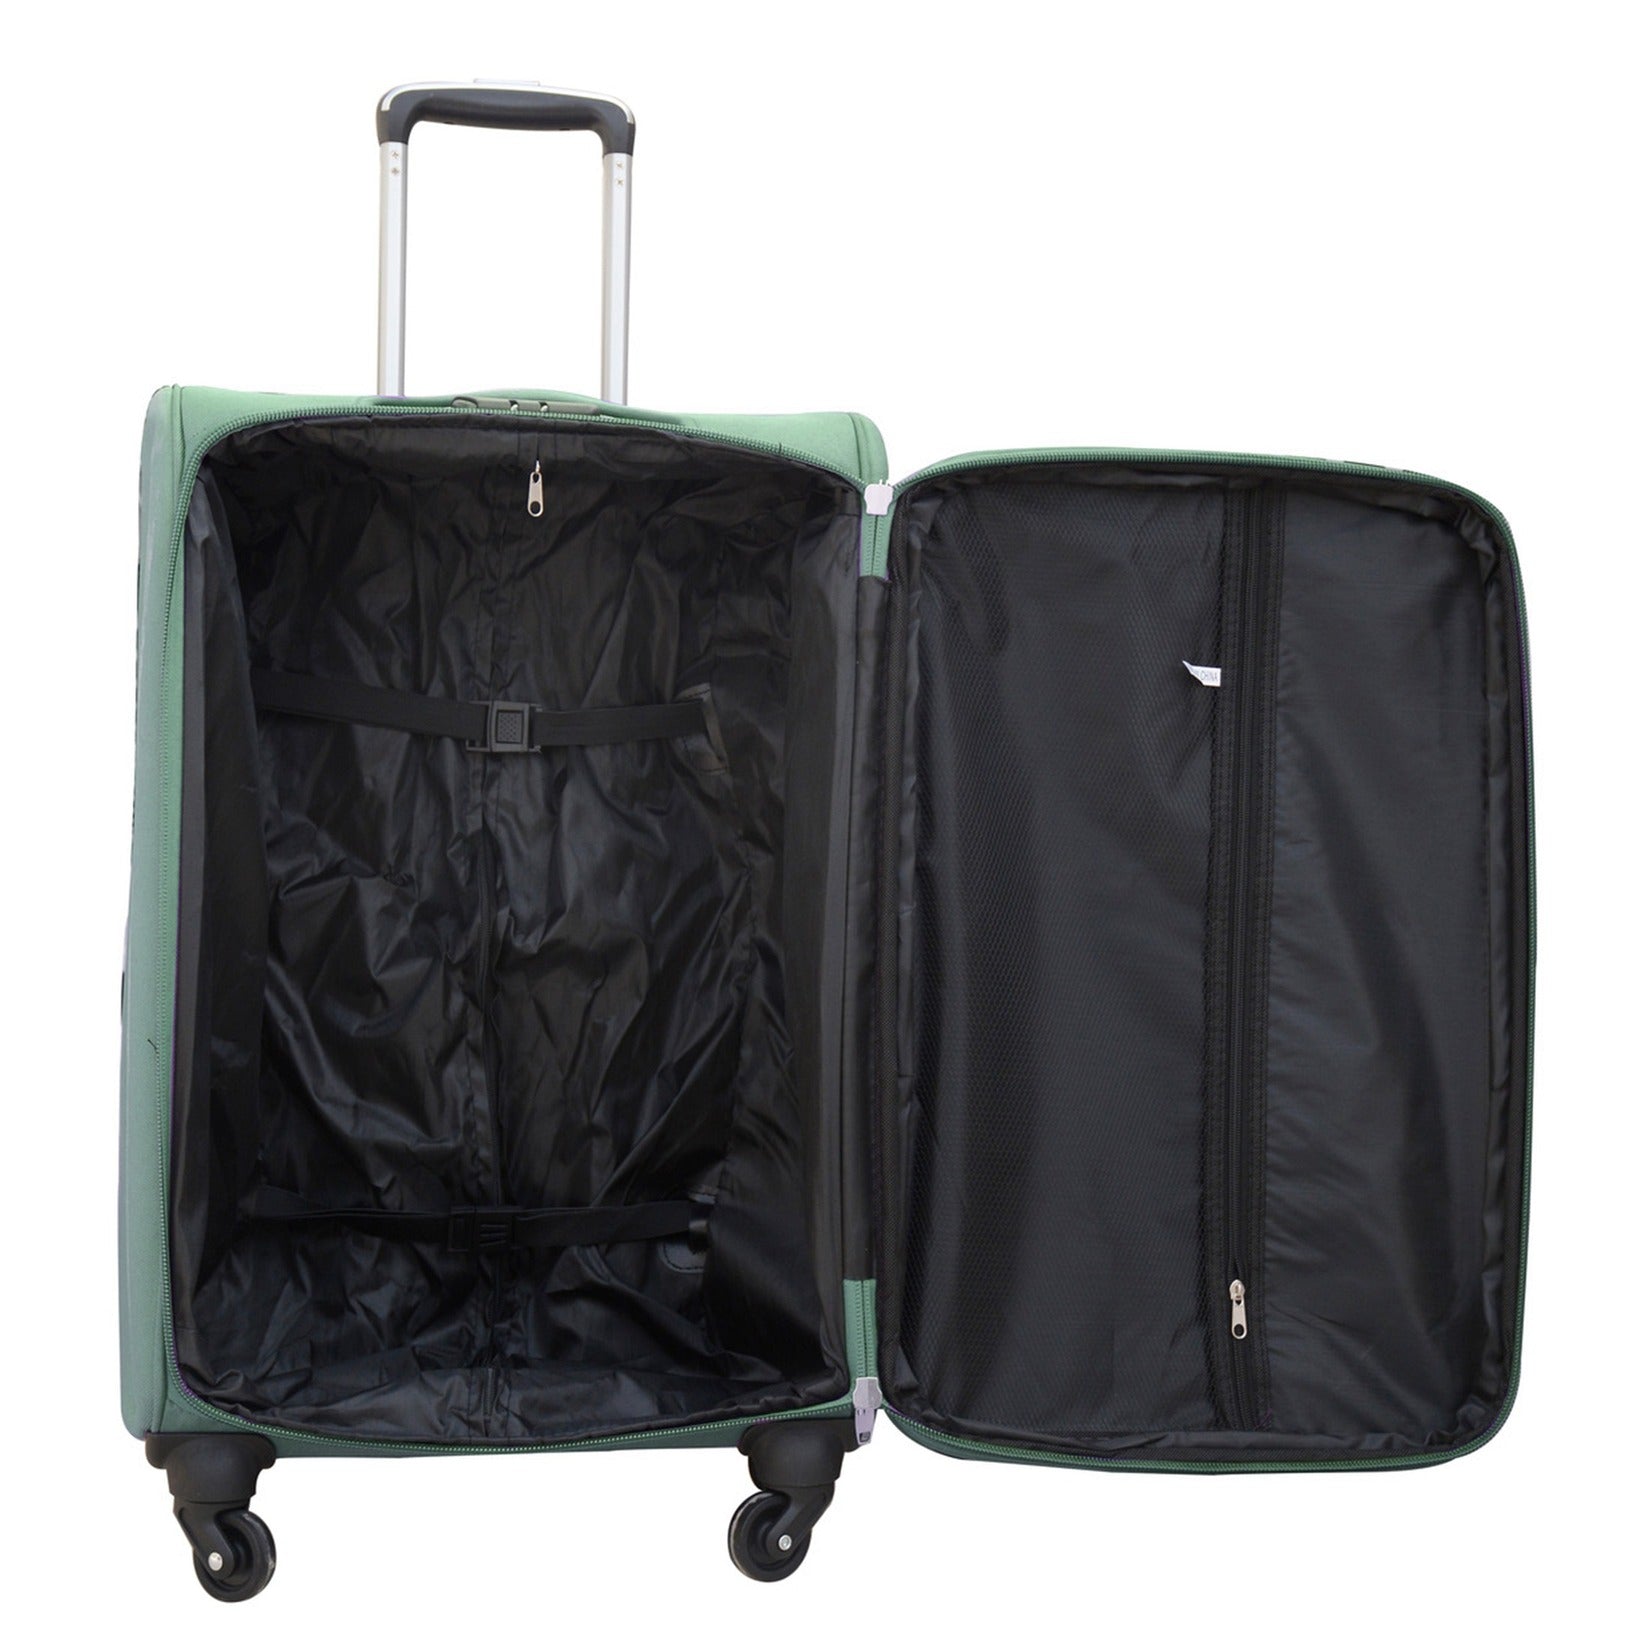 20" Green Colour SJ JIAN 4 Wheel Luggage Lightweight Soft Material Carry On Trolley Bag